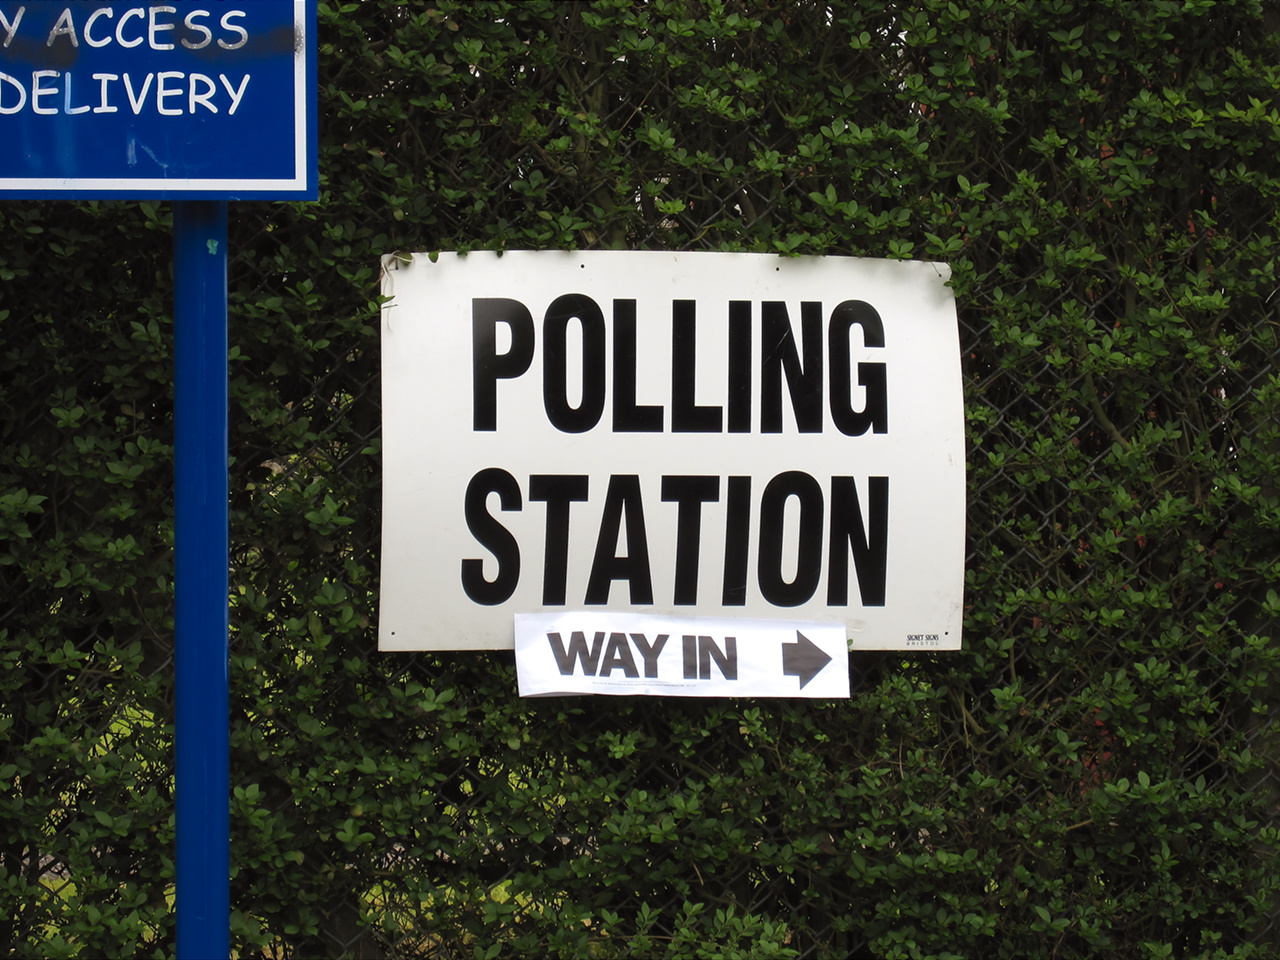 A polling station (Image: Paul Albertella under Creative Commons)